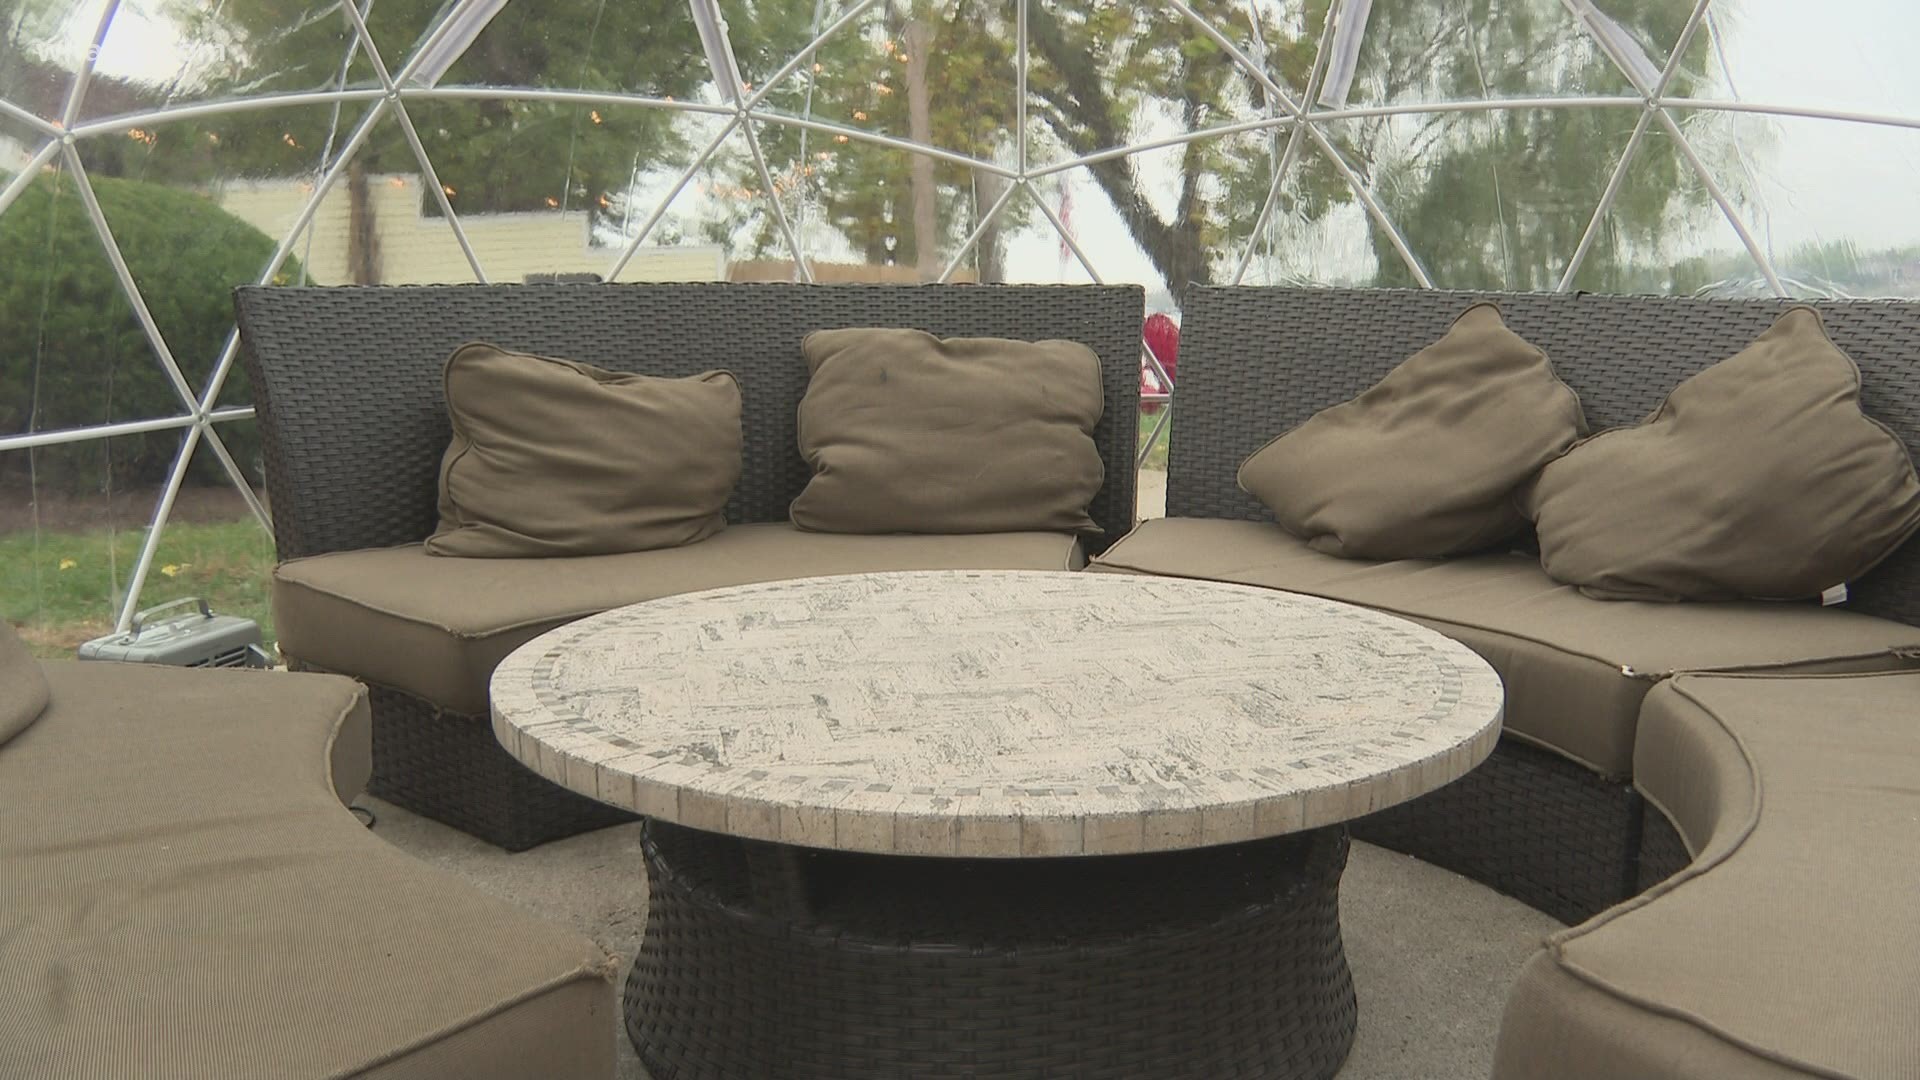 Captain's Quarters has added igloos to their outdoor dining area for people to continue to eat outside as it gets colder.